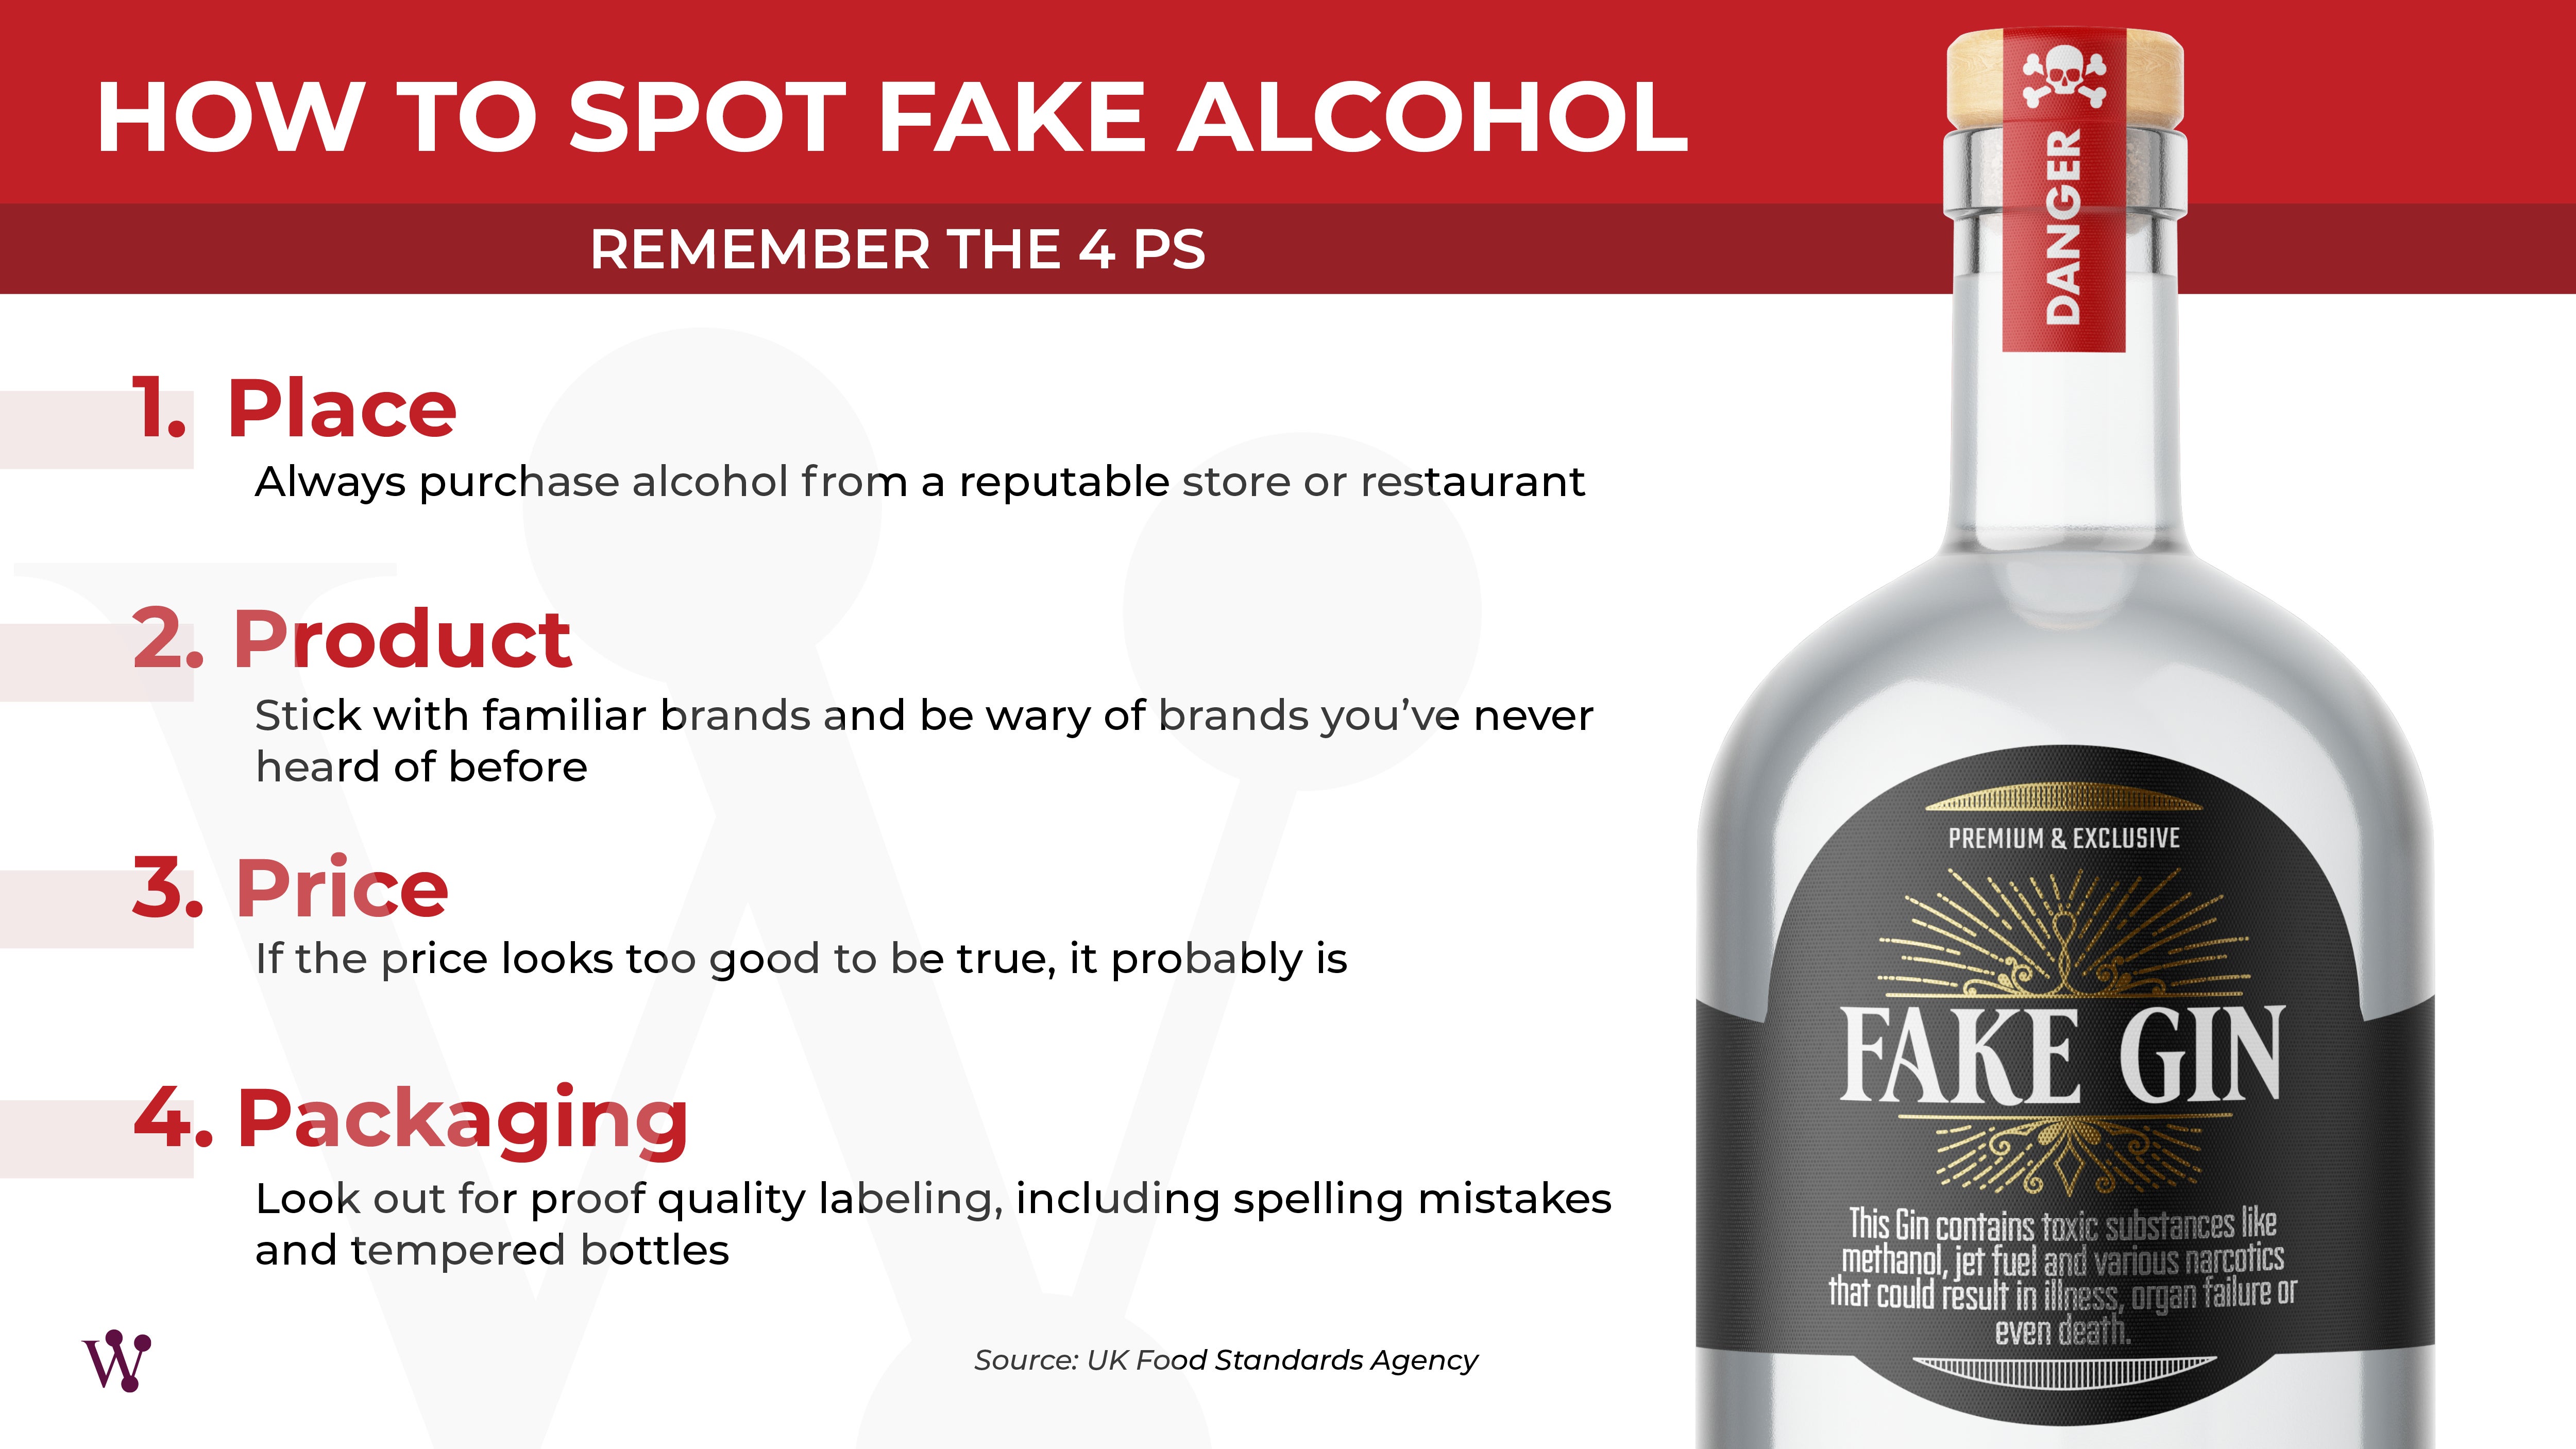 Use the 4'Ps to Spot Fake Alcohol Abroad